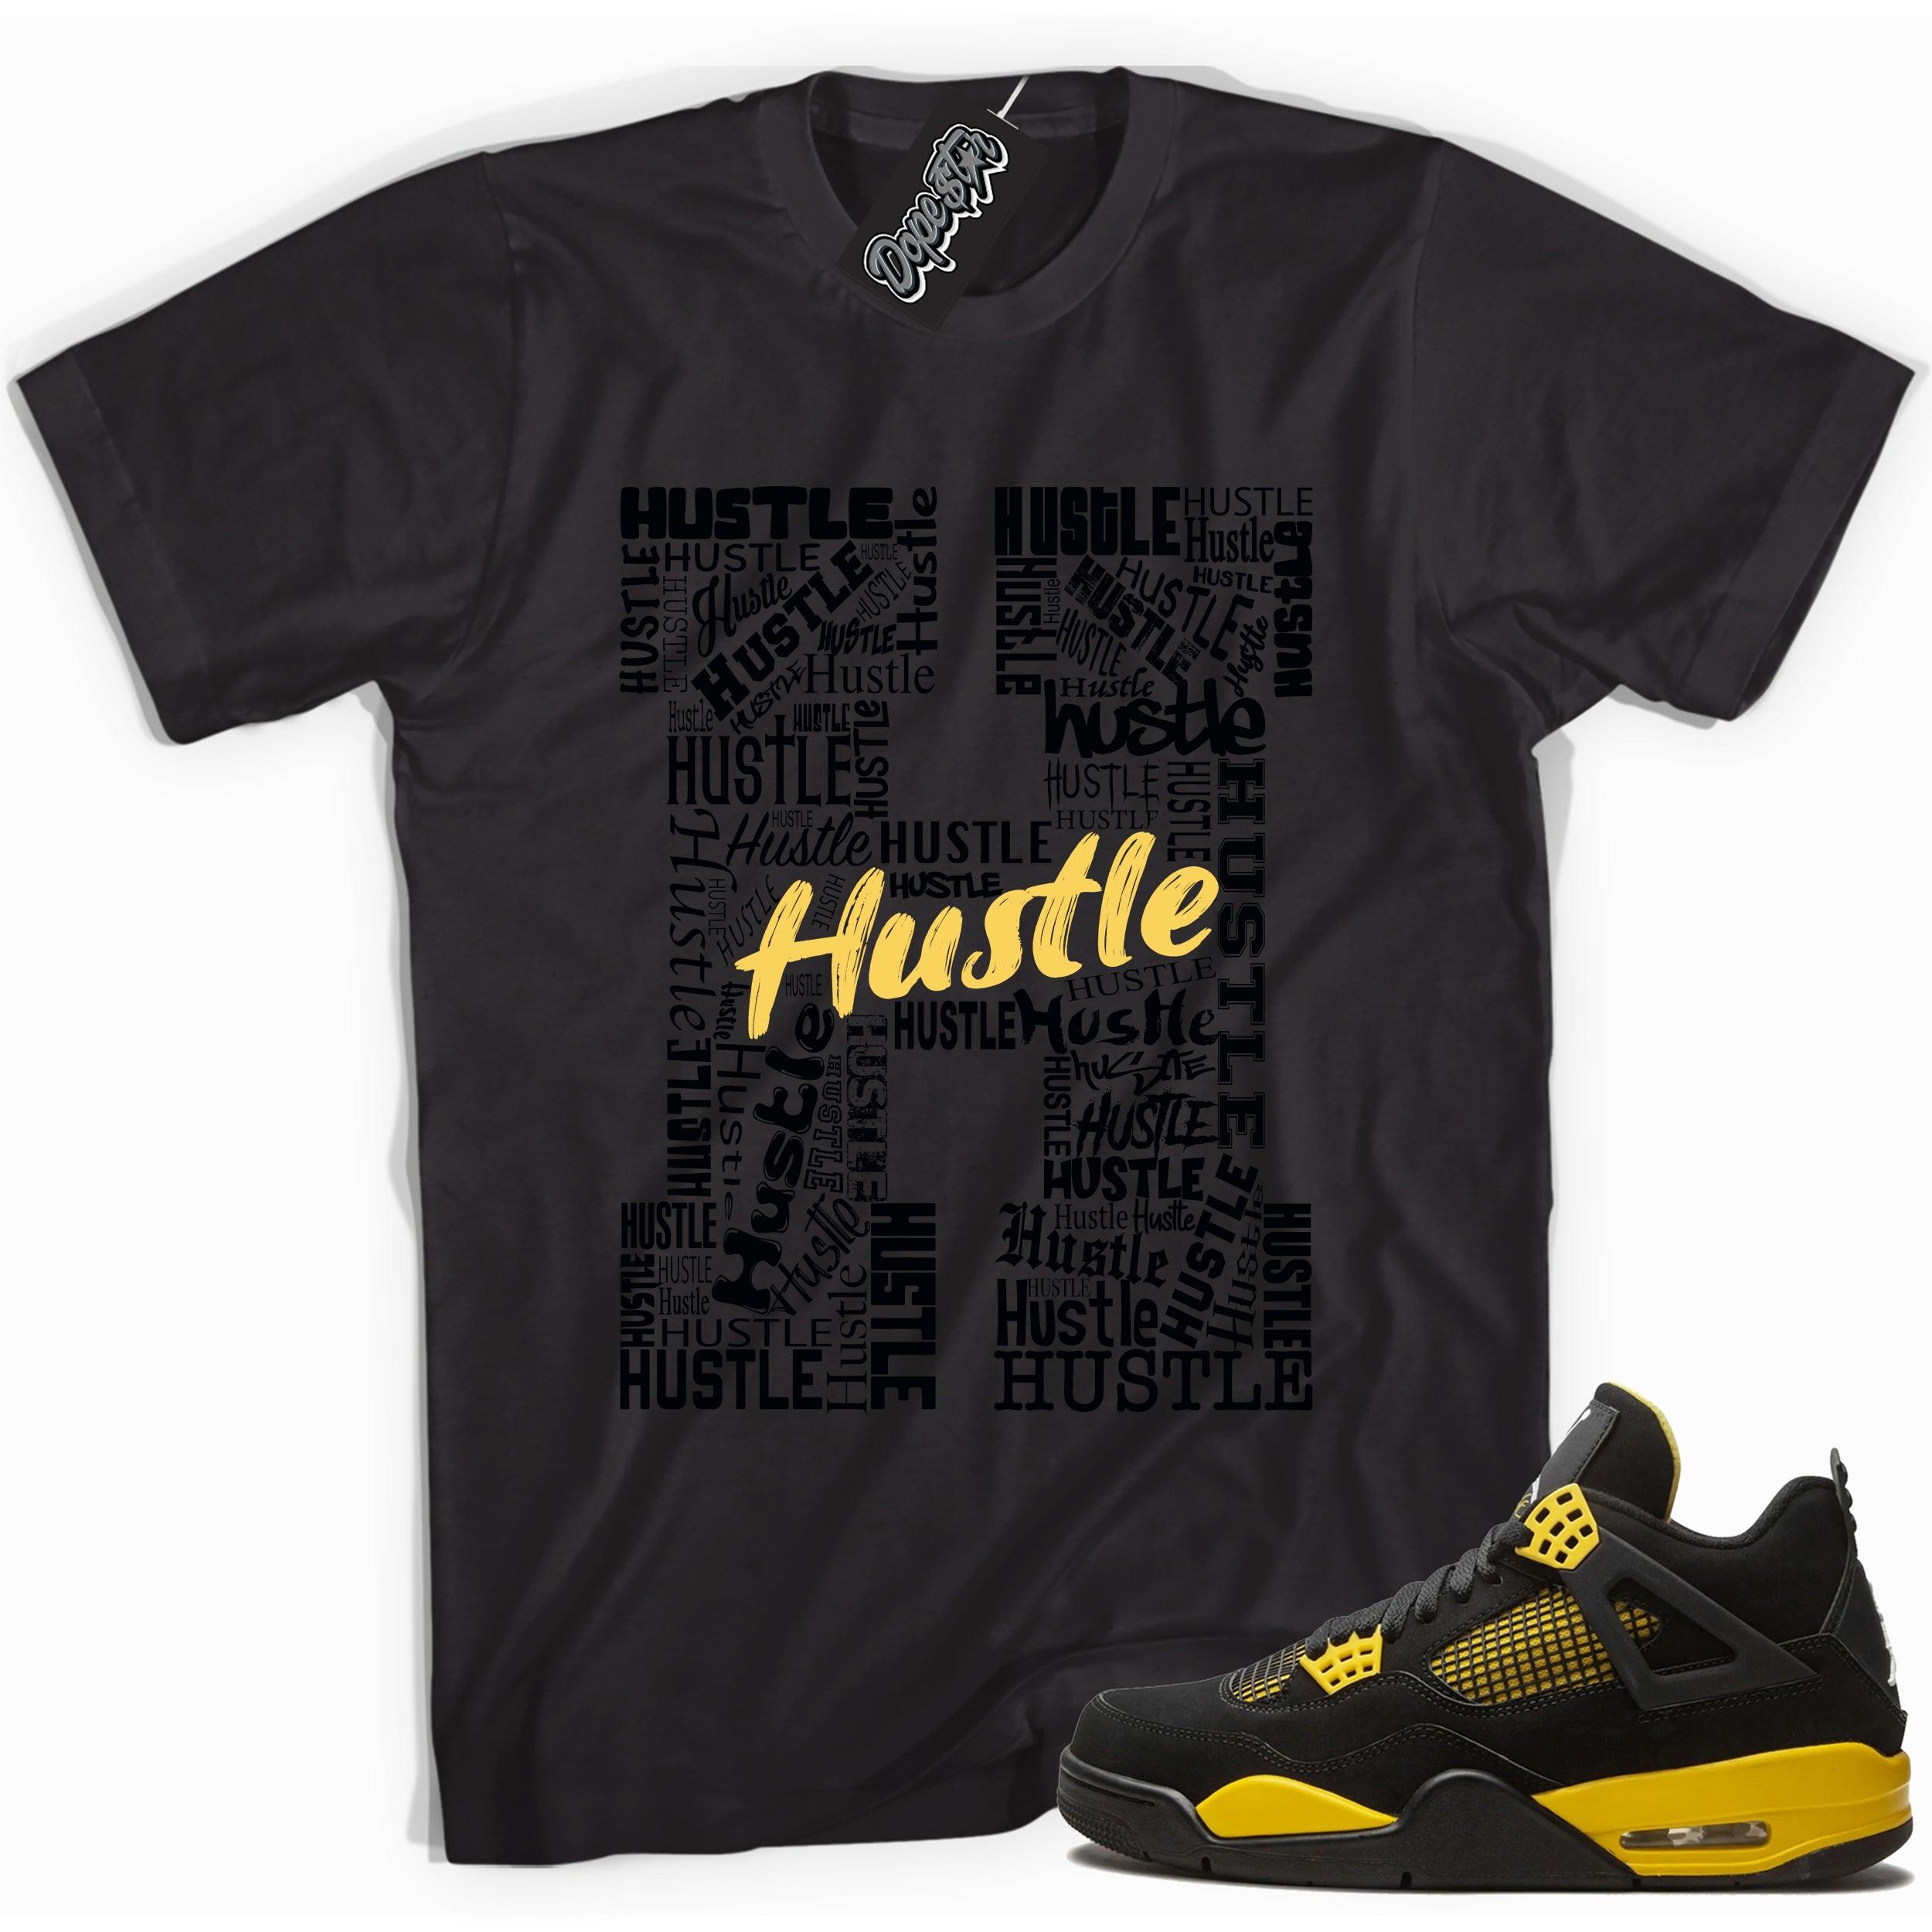 Cool black graphic tee with 'h for hustle' print, that perfectly matches  Air Jordan 4 Thunder sneakers